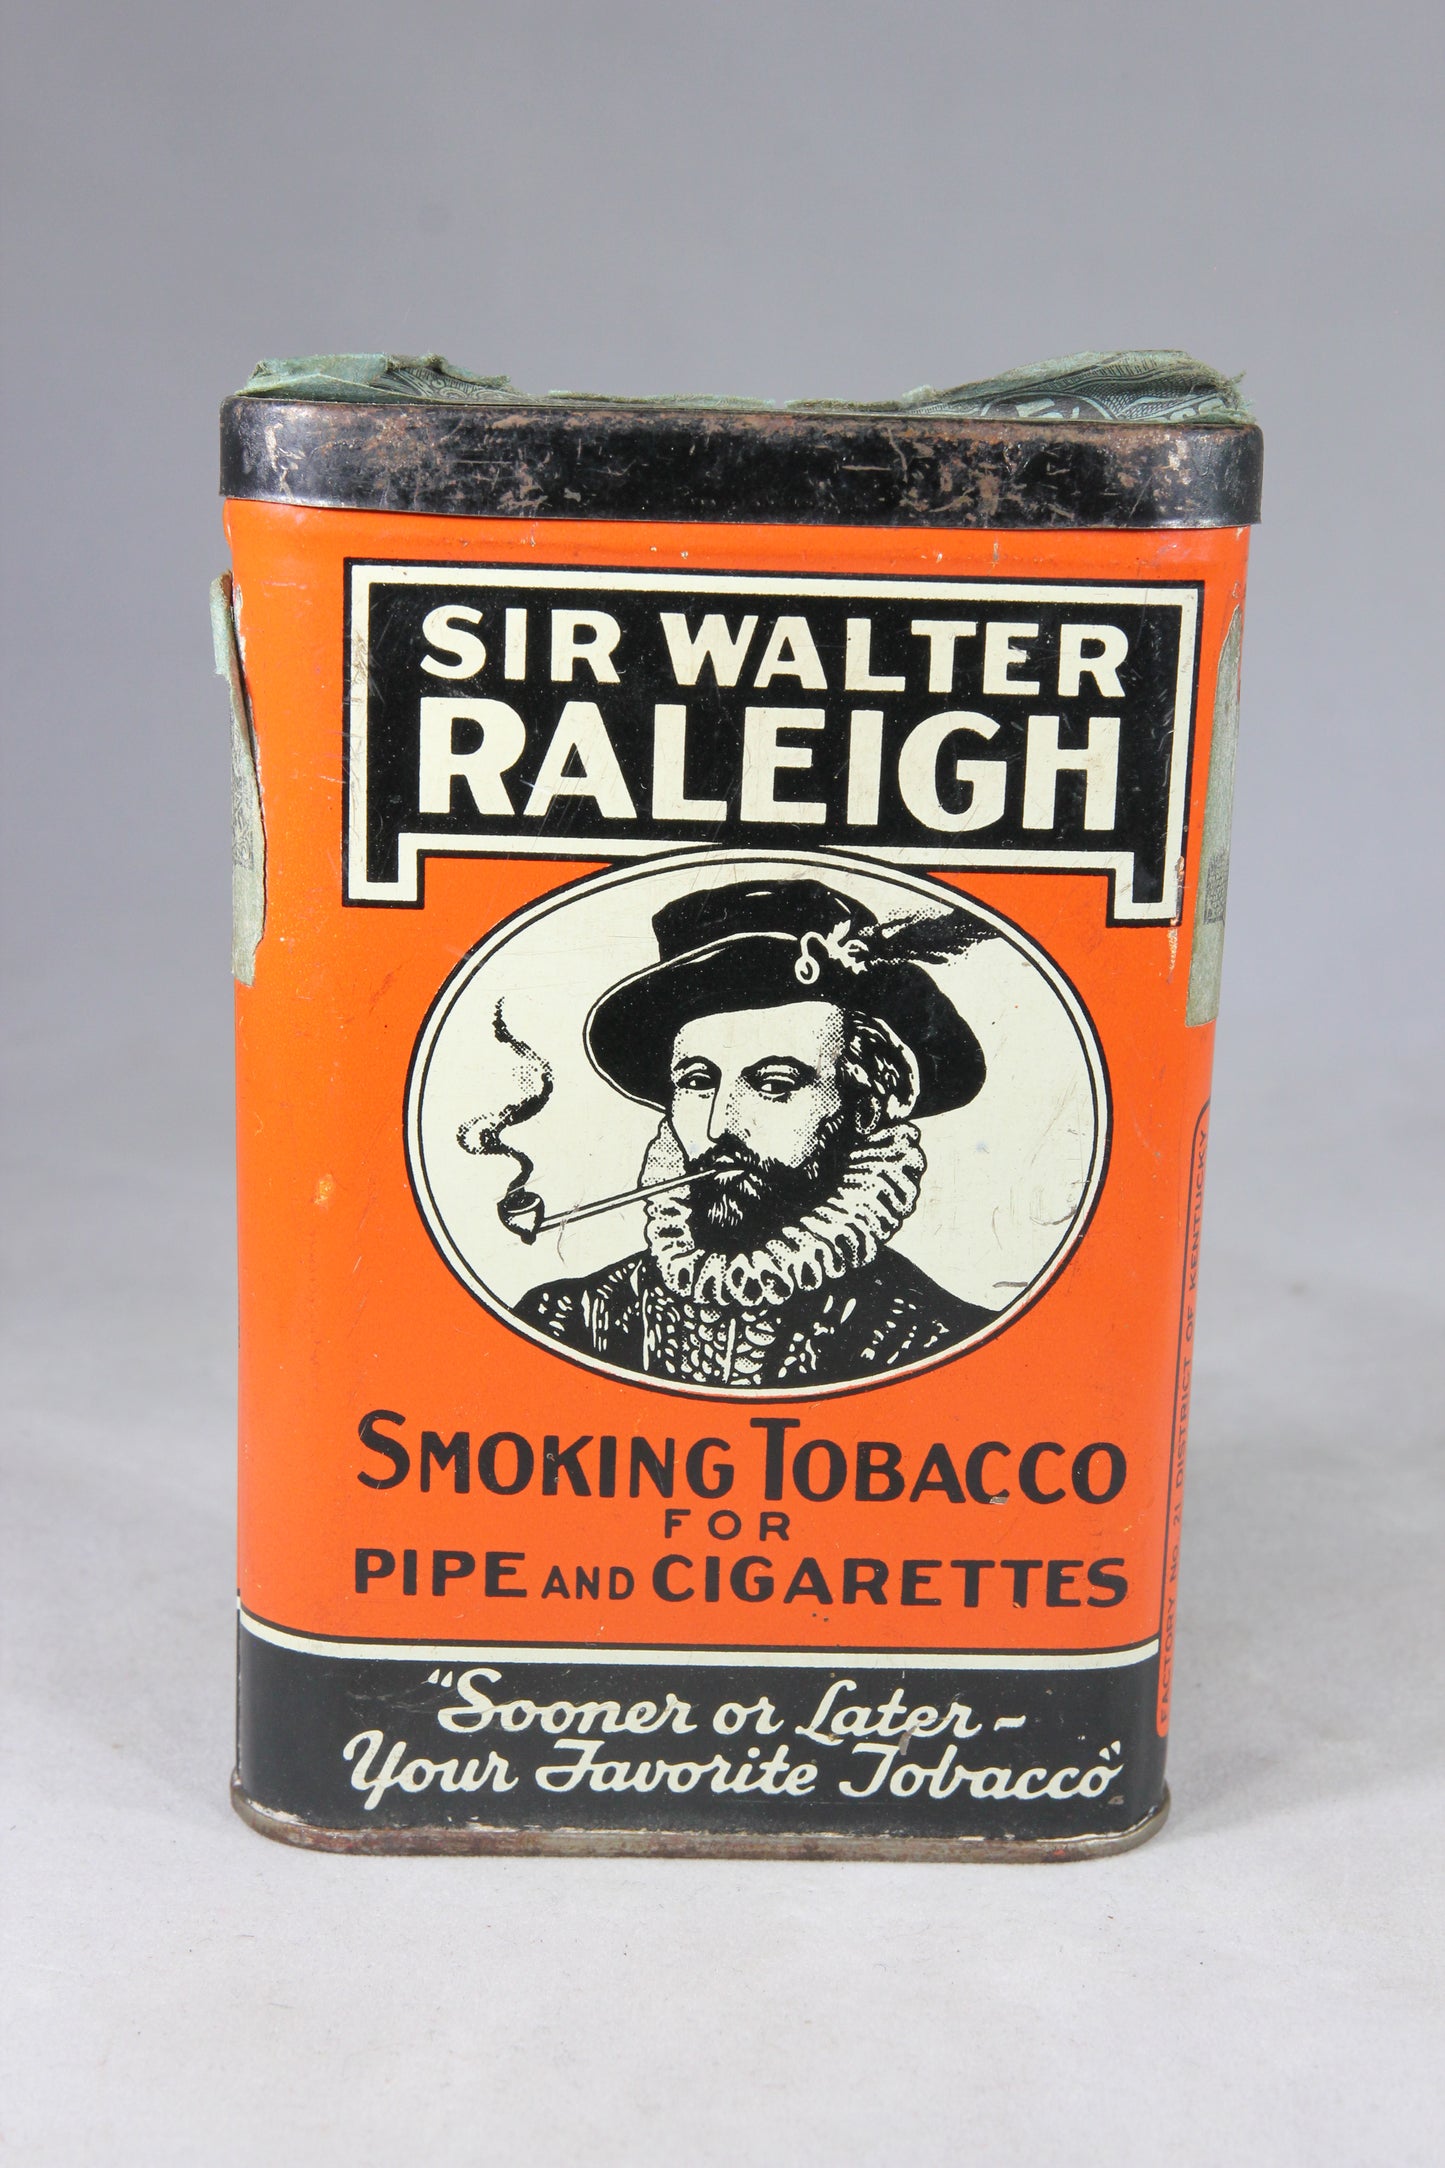 Sir Walter Raleigh Smoking Tobacco for Pipe and Cigarettes Tin